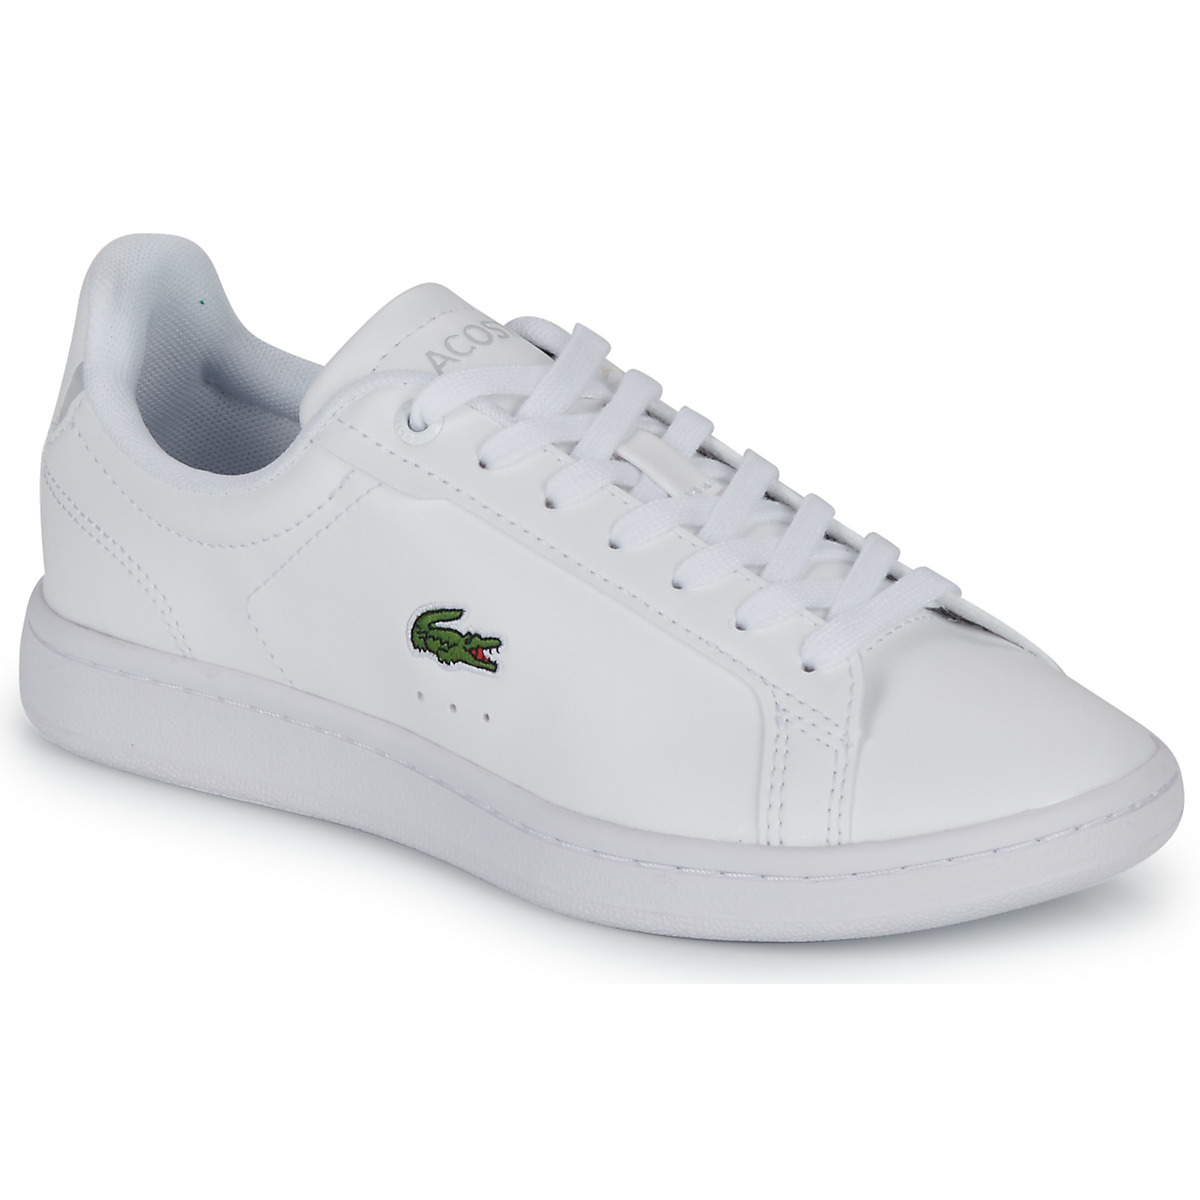 Lacoste Carnaby Pro Bl 23 1 Suj White